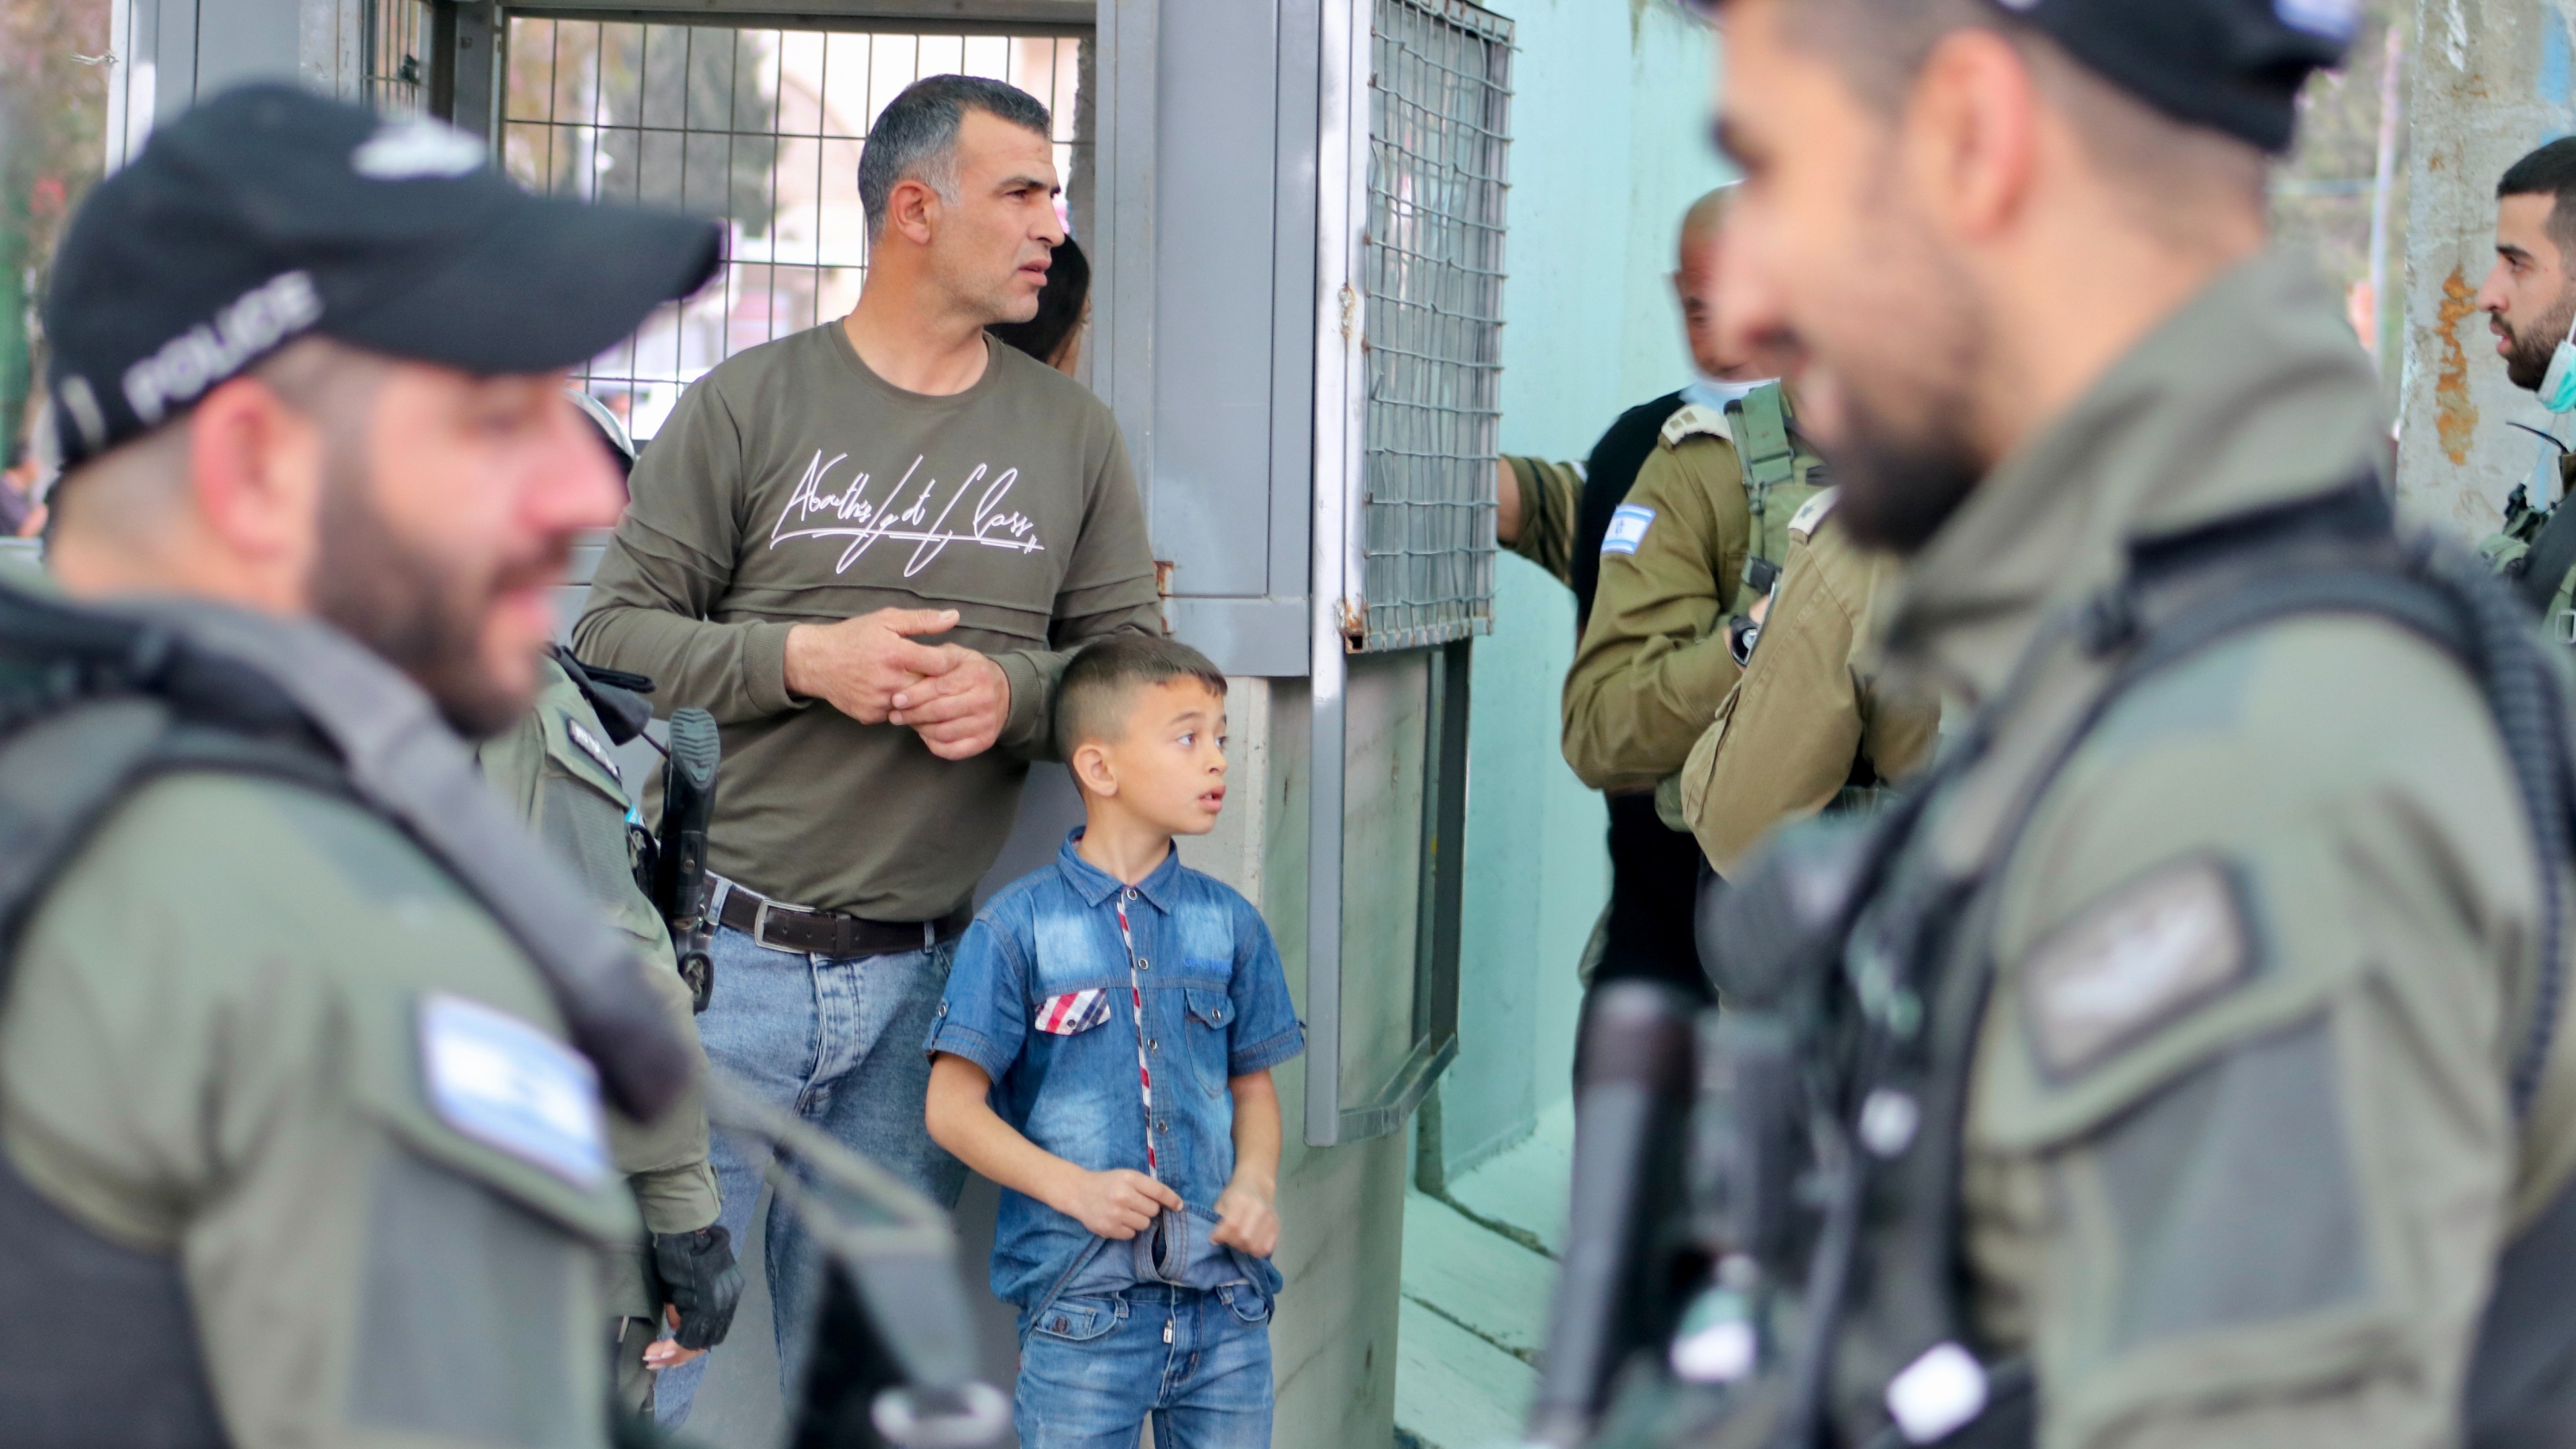 Israeli soldiers check IDs of Palestinians crossing from Bethlehem into Jerusalem on 8 April 2022. (MEE/Mosab Shawer)